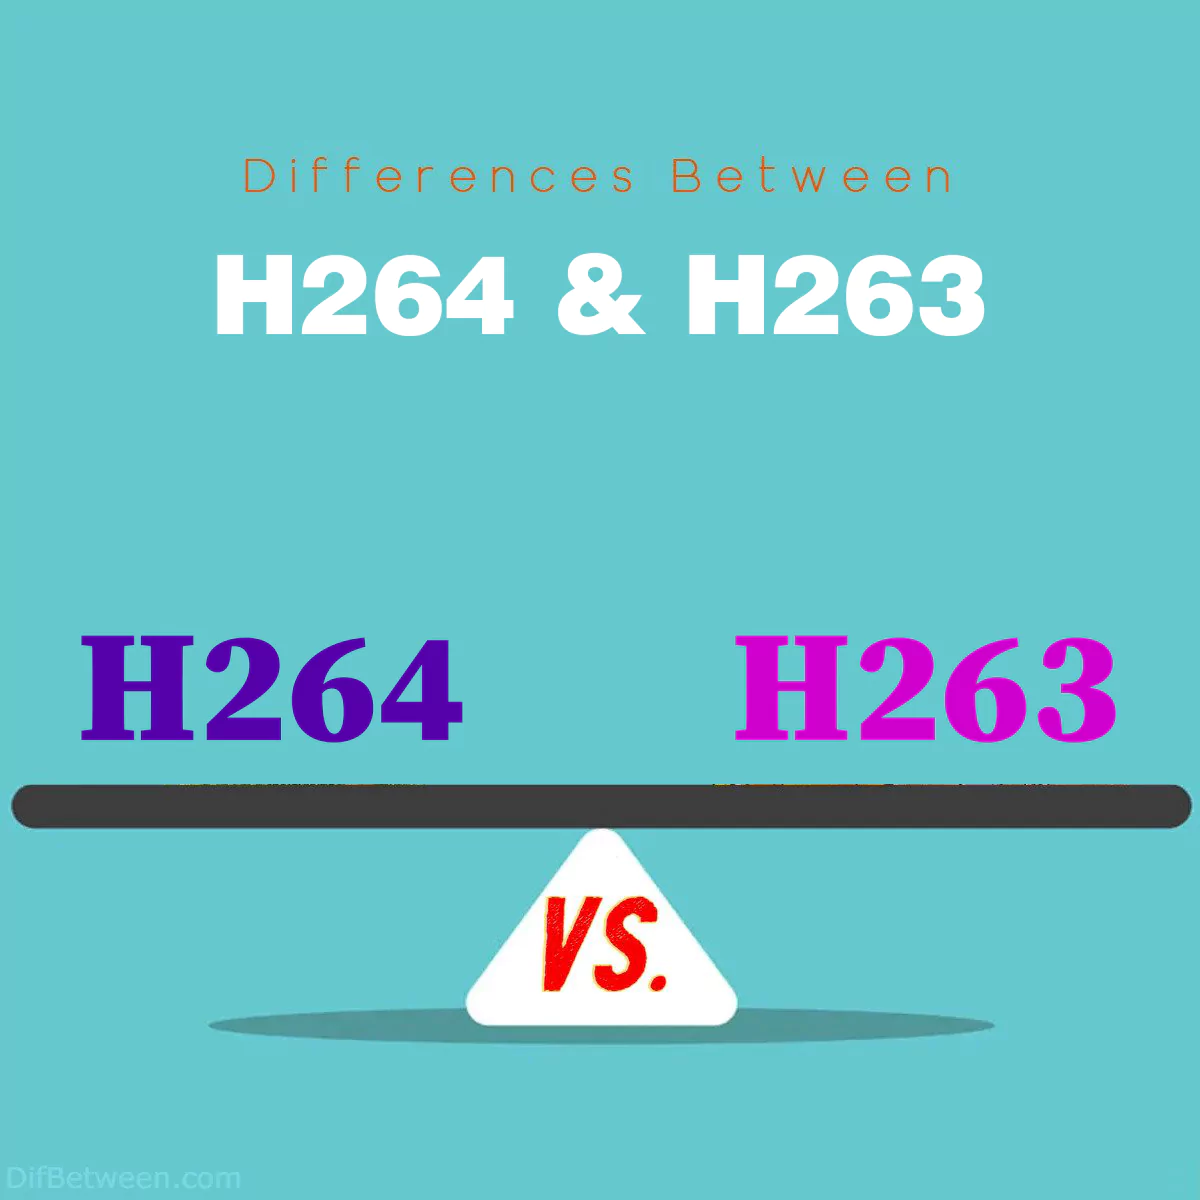 Differences Between H264 and H263